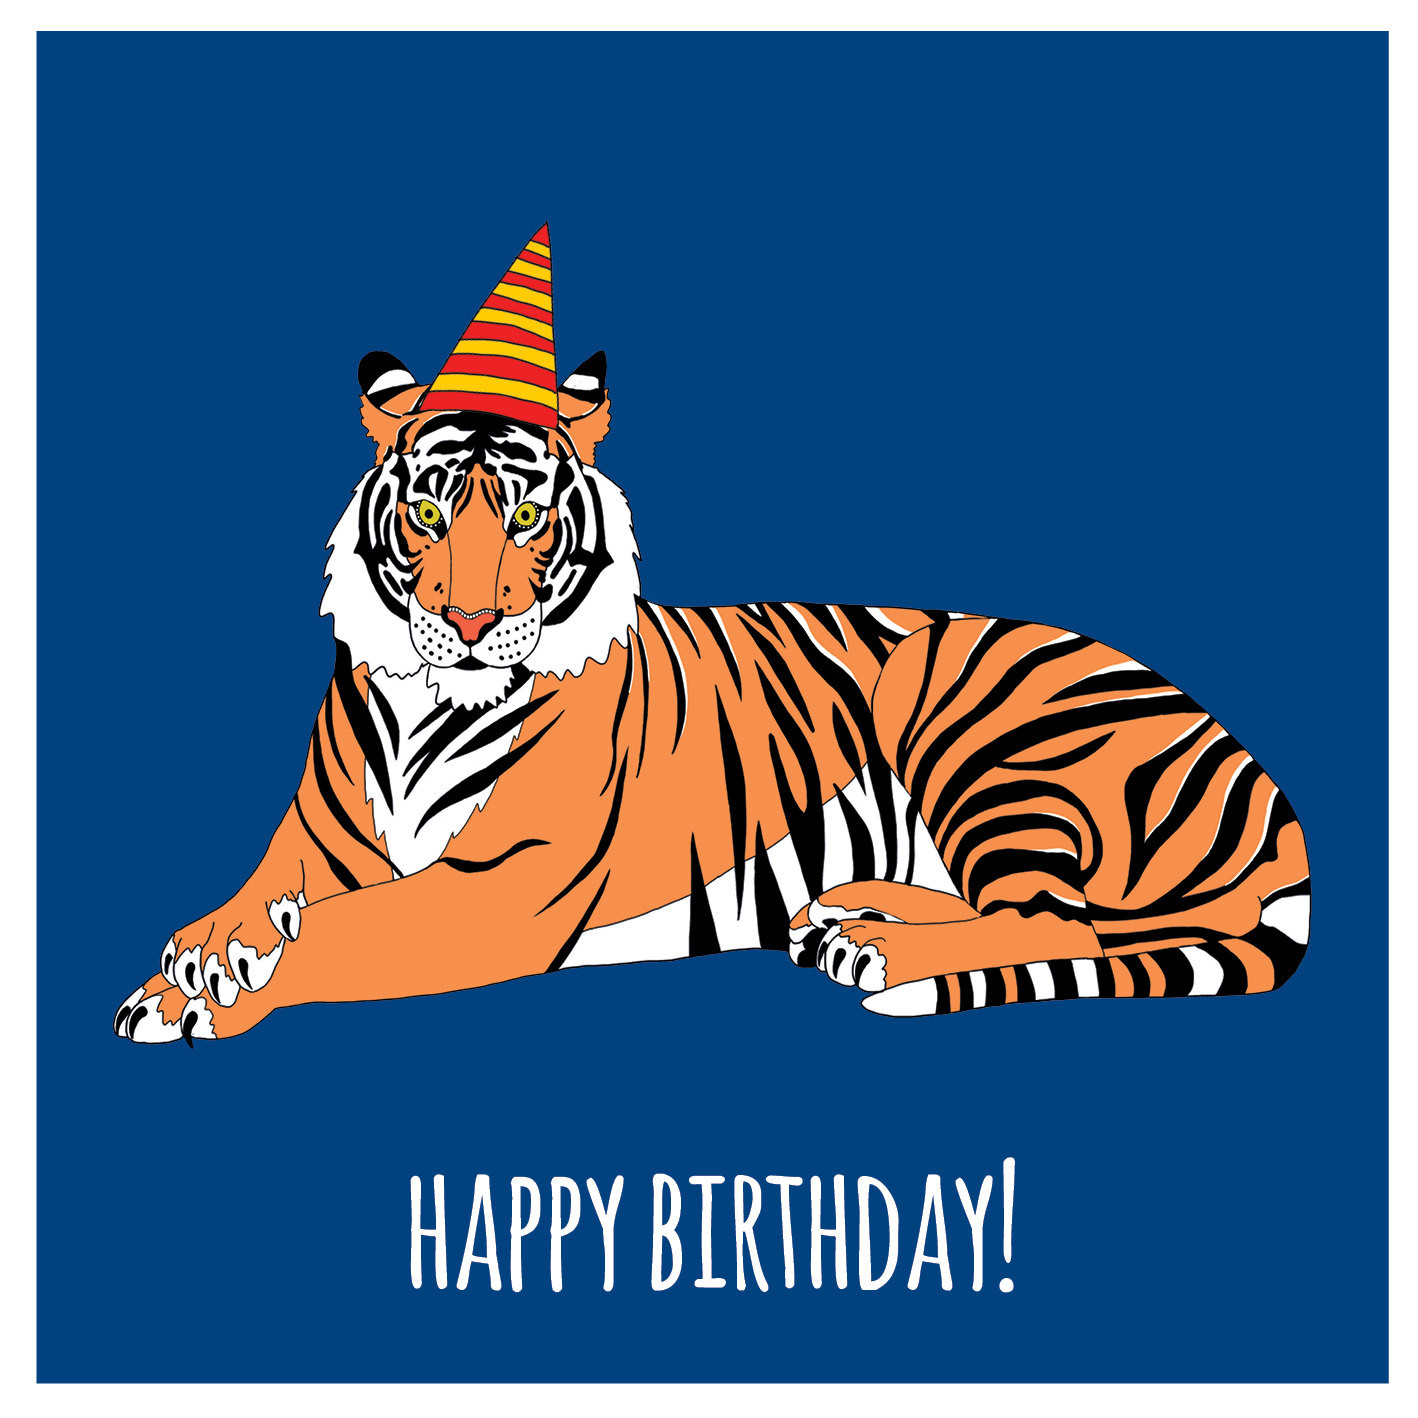 Tiger Birthday Party
 Tiger in a Party Hat Birthday Card by redparka on Etsy